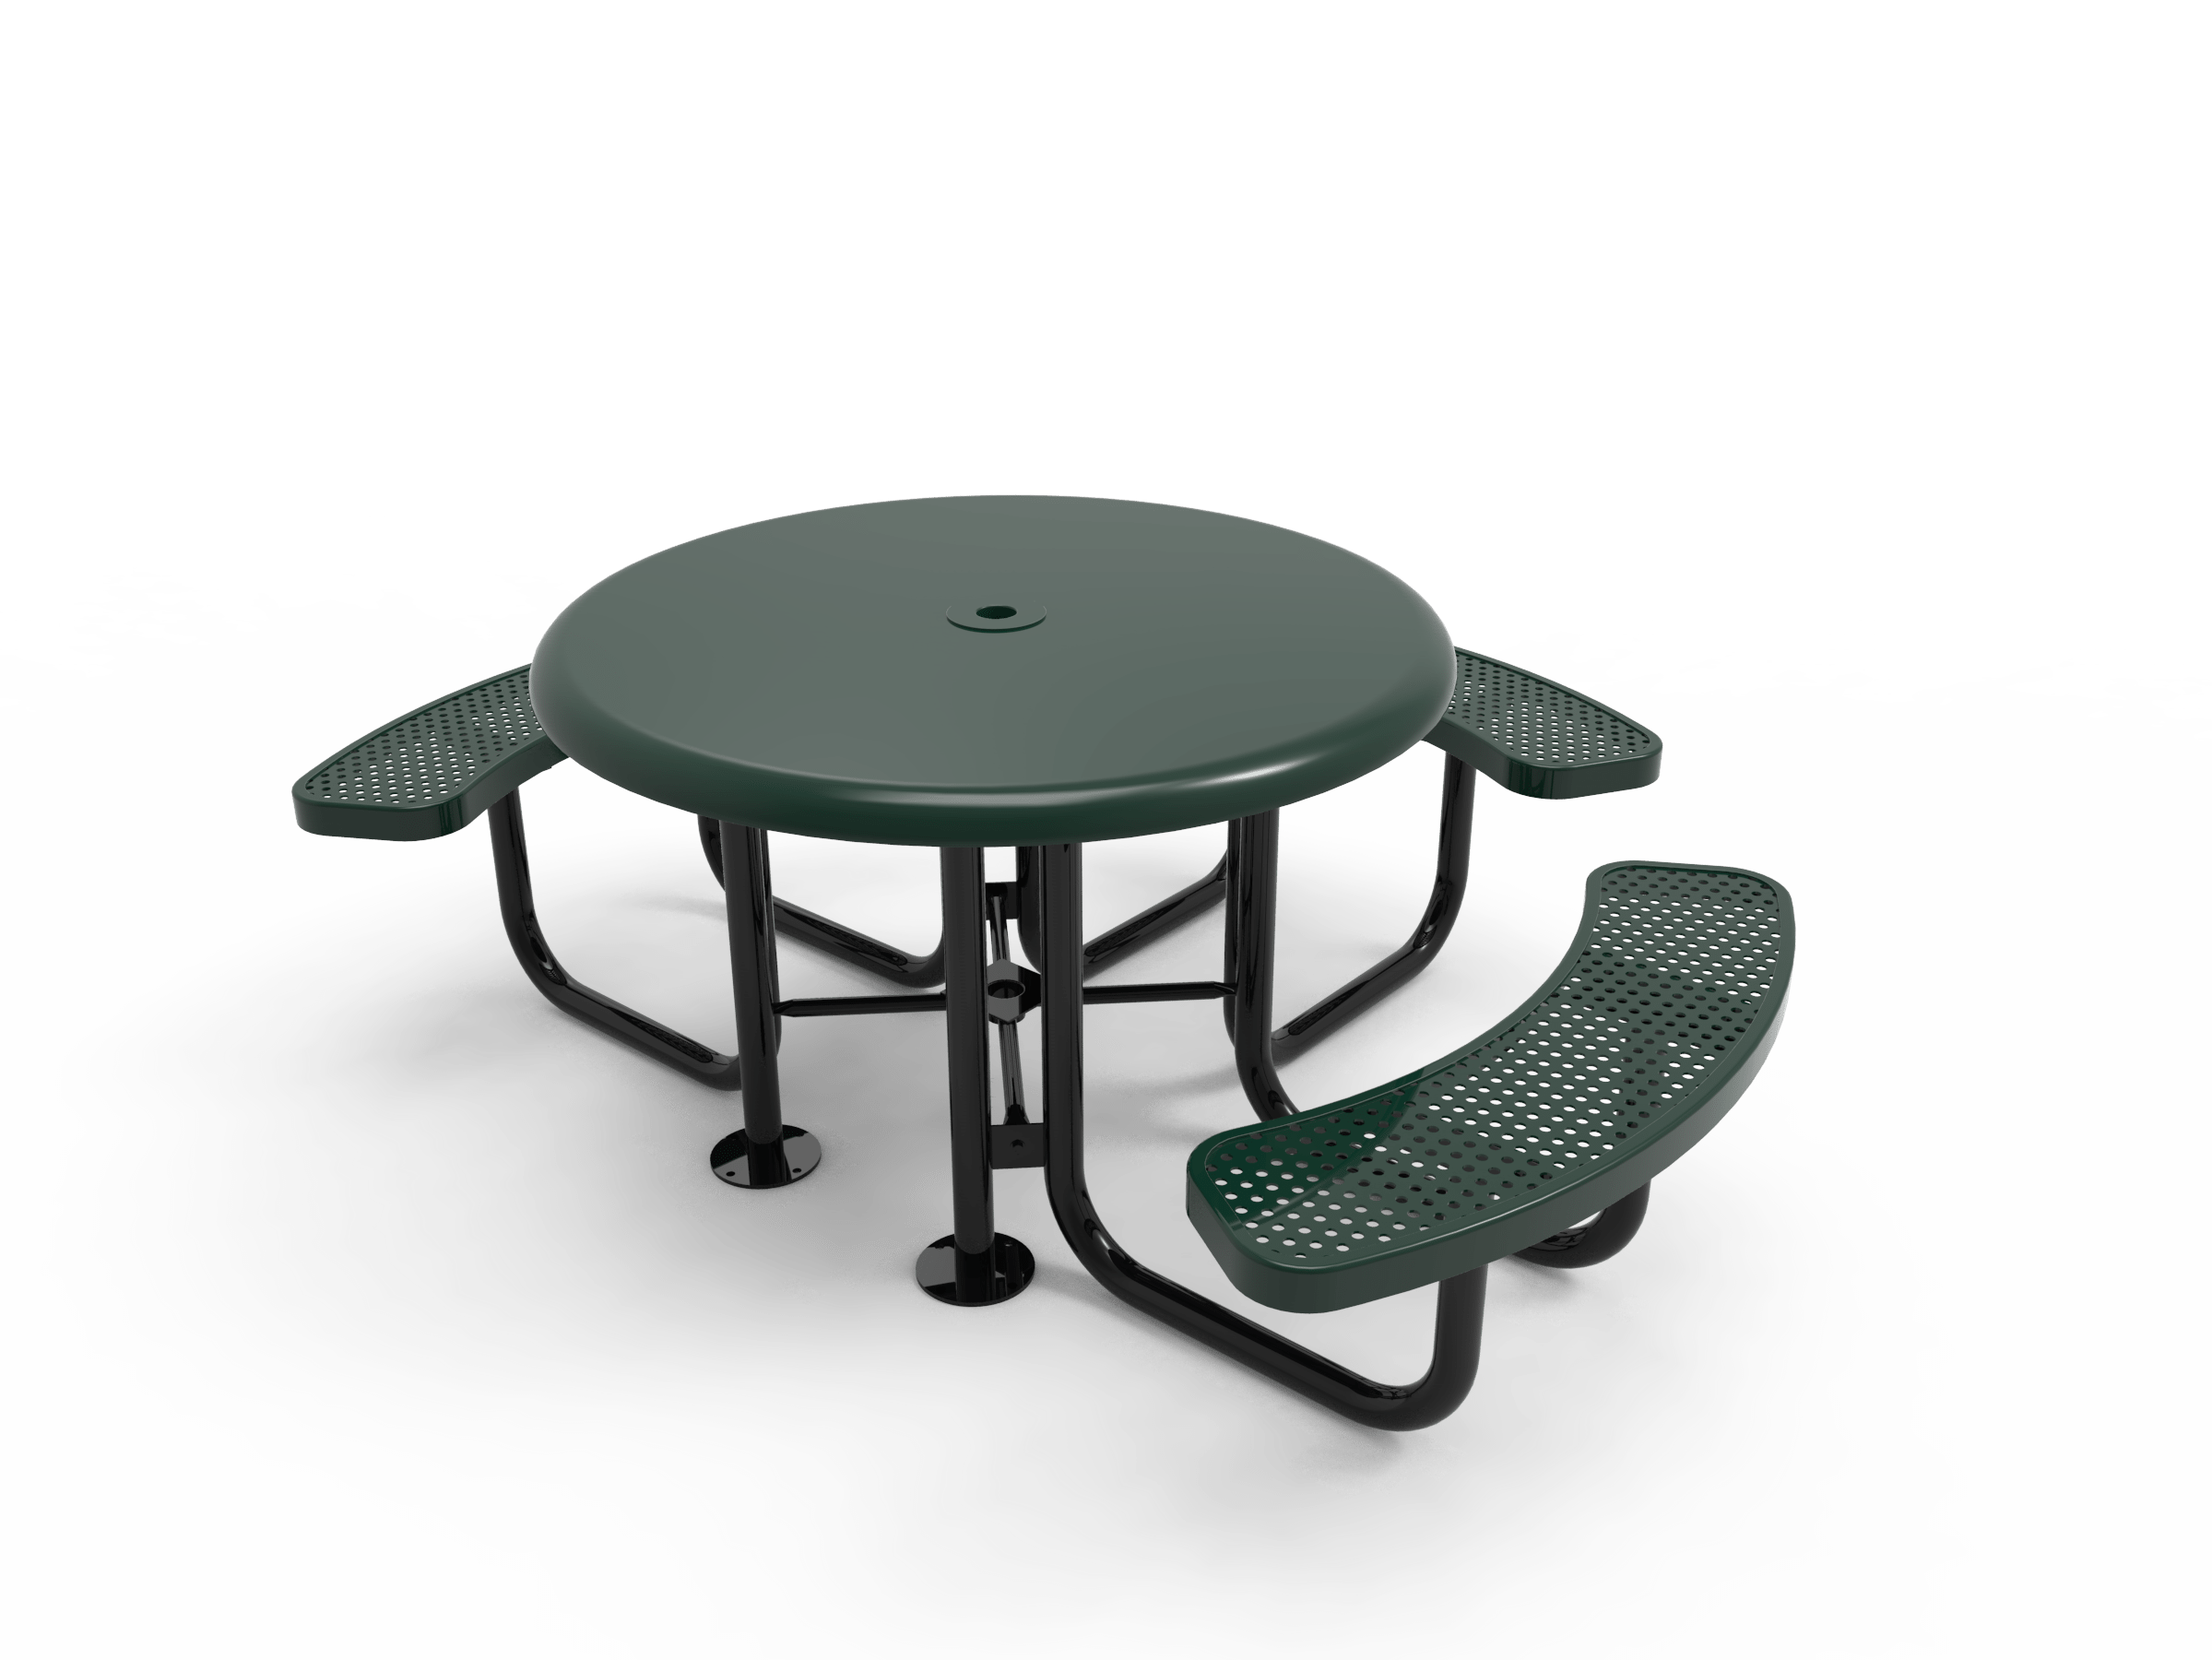 46″ Round Solid Picnic Table 3 Seat-Punched
TRD46-D-04-003
Industry Standard Finish
$1599.00
TRS46-B-04-003
Advantage Premium Finish
$2139.00
